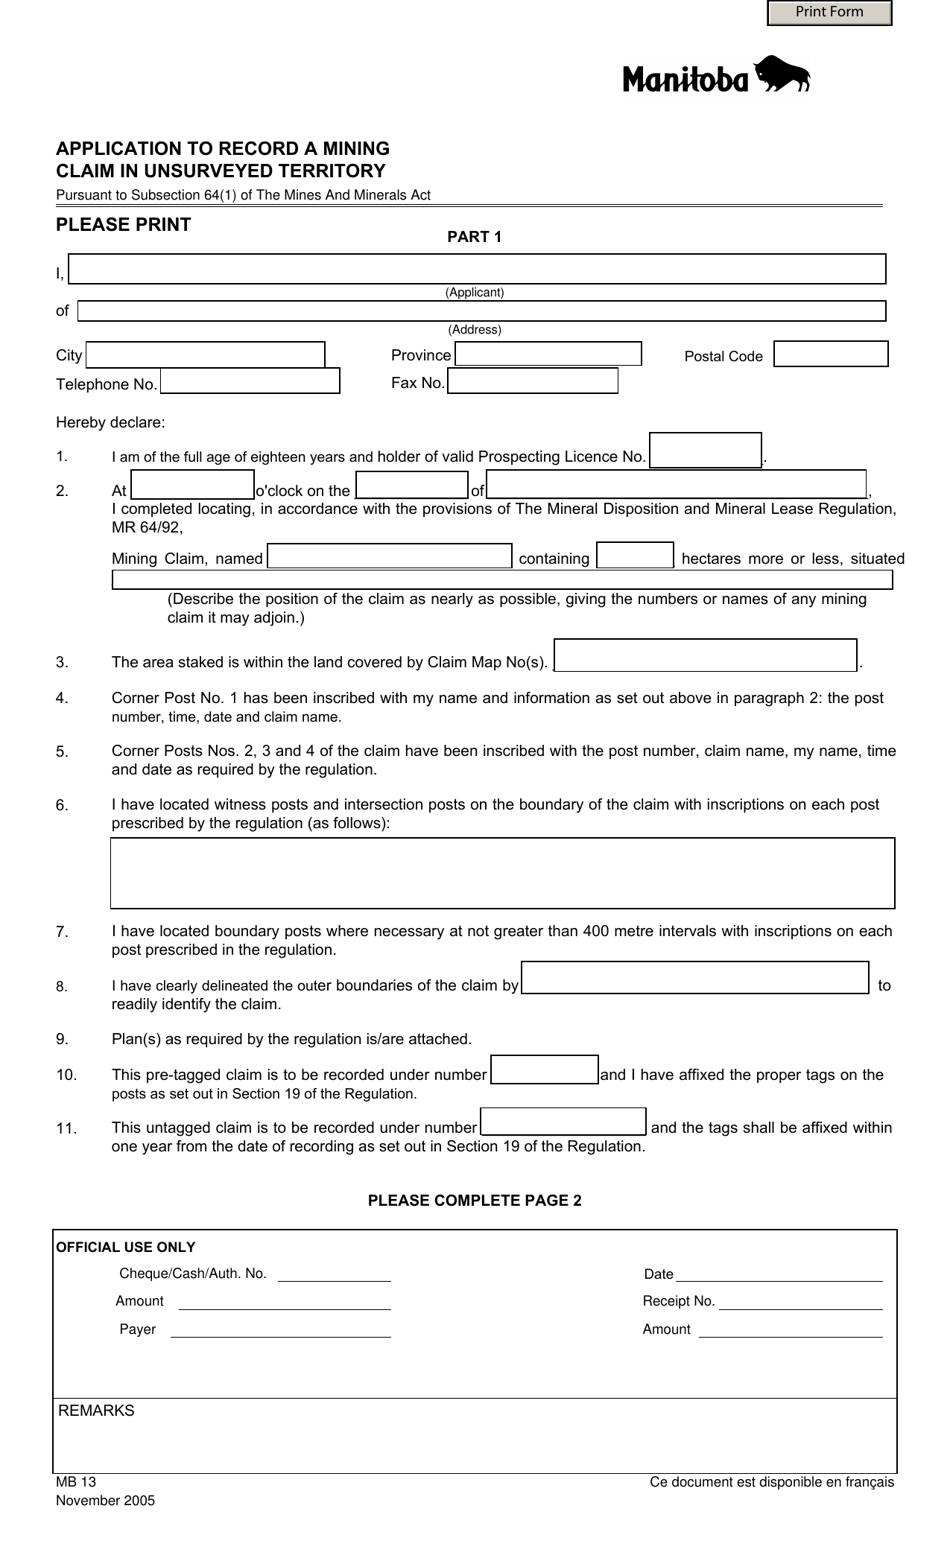 Form MB13 Application to Record a Mining Claim in Unsurveyed Territory - Manitoba, Canada, Page 1